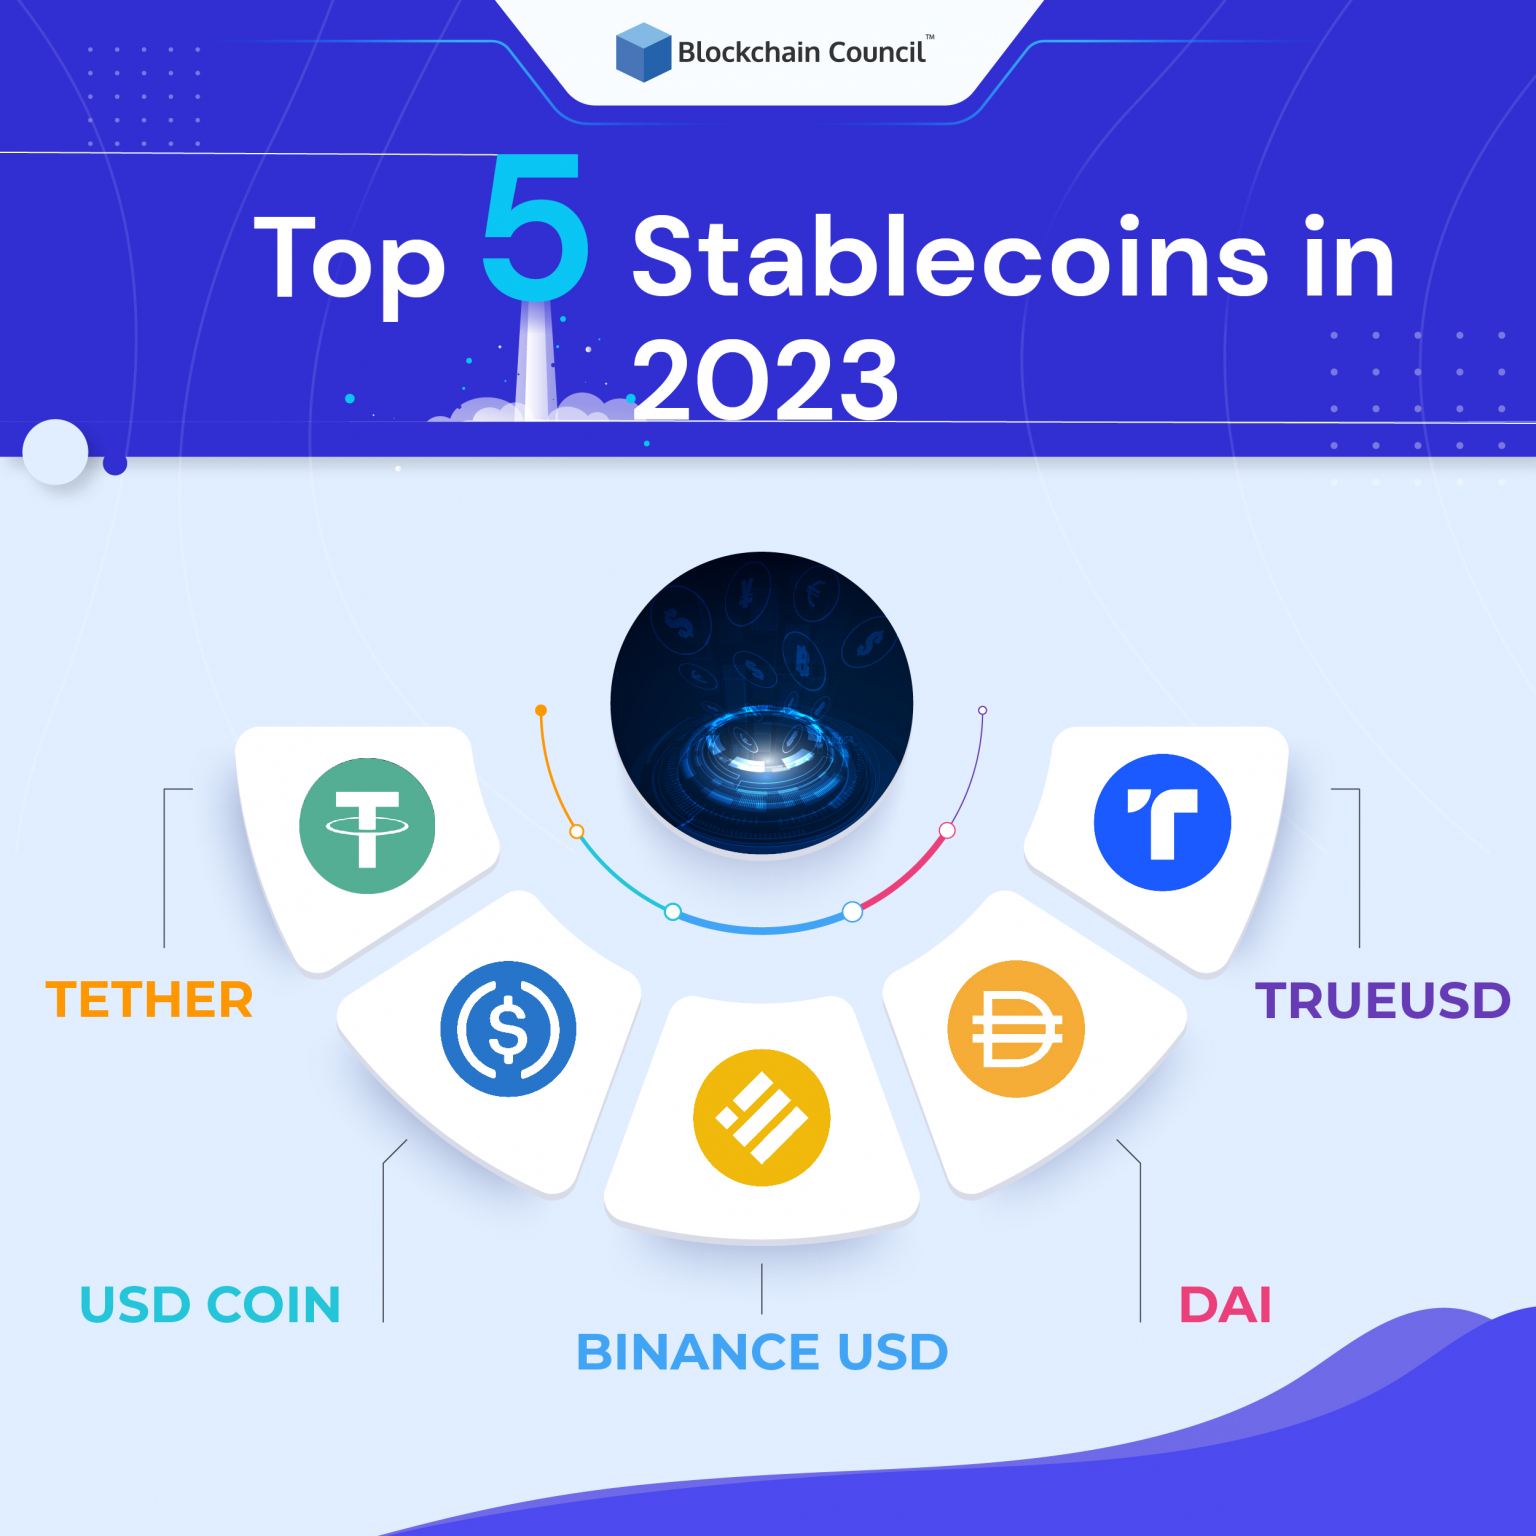 Top 5 Stablecoins in 2023 [UPDATED] Blockchain Council